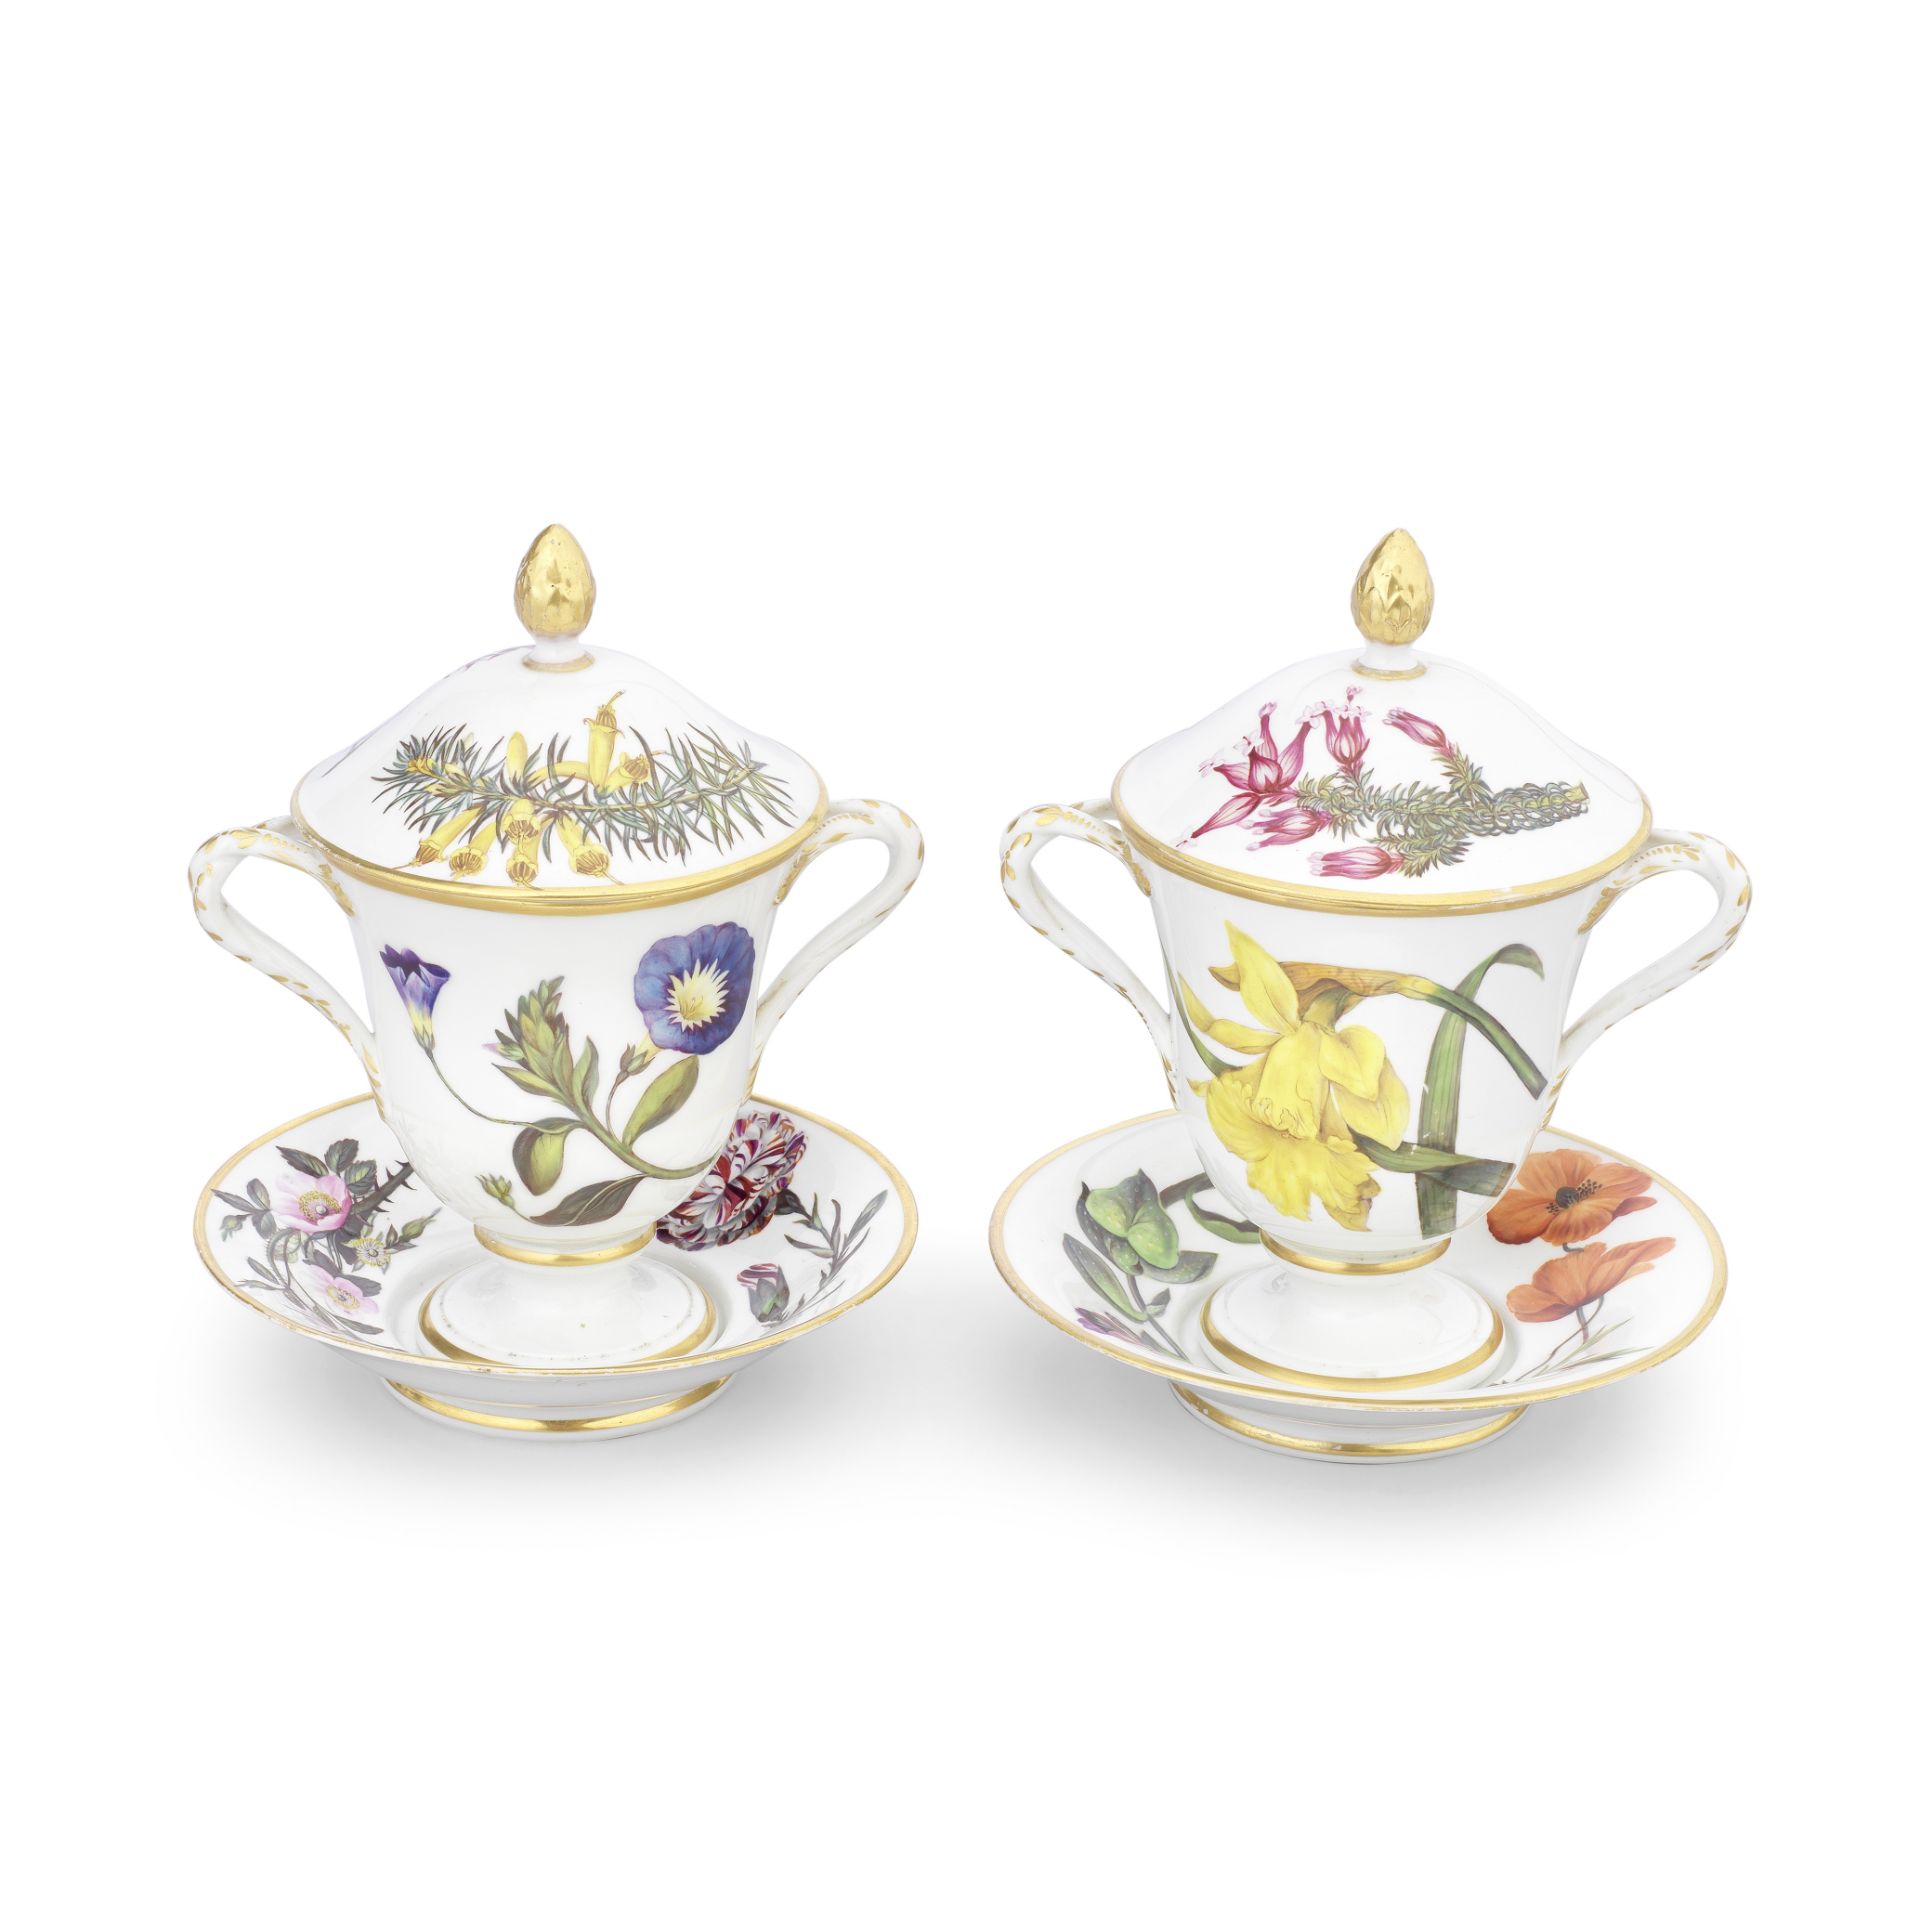 A pair of very unusual Derby two-handled botanical cups, covers and stands, circa 1800